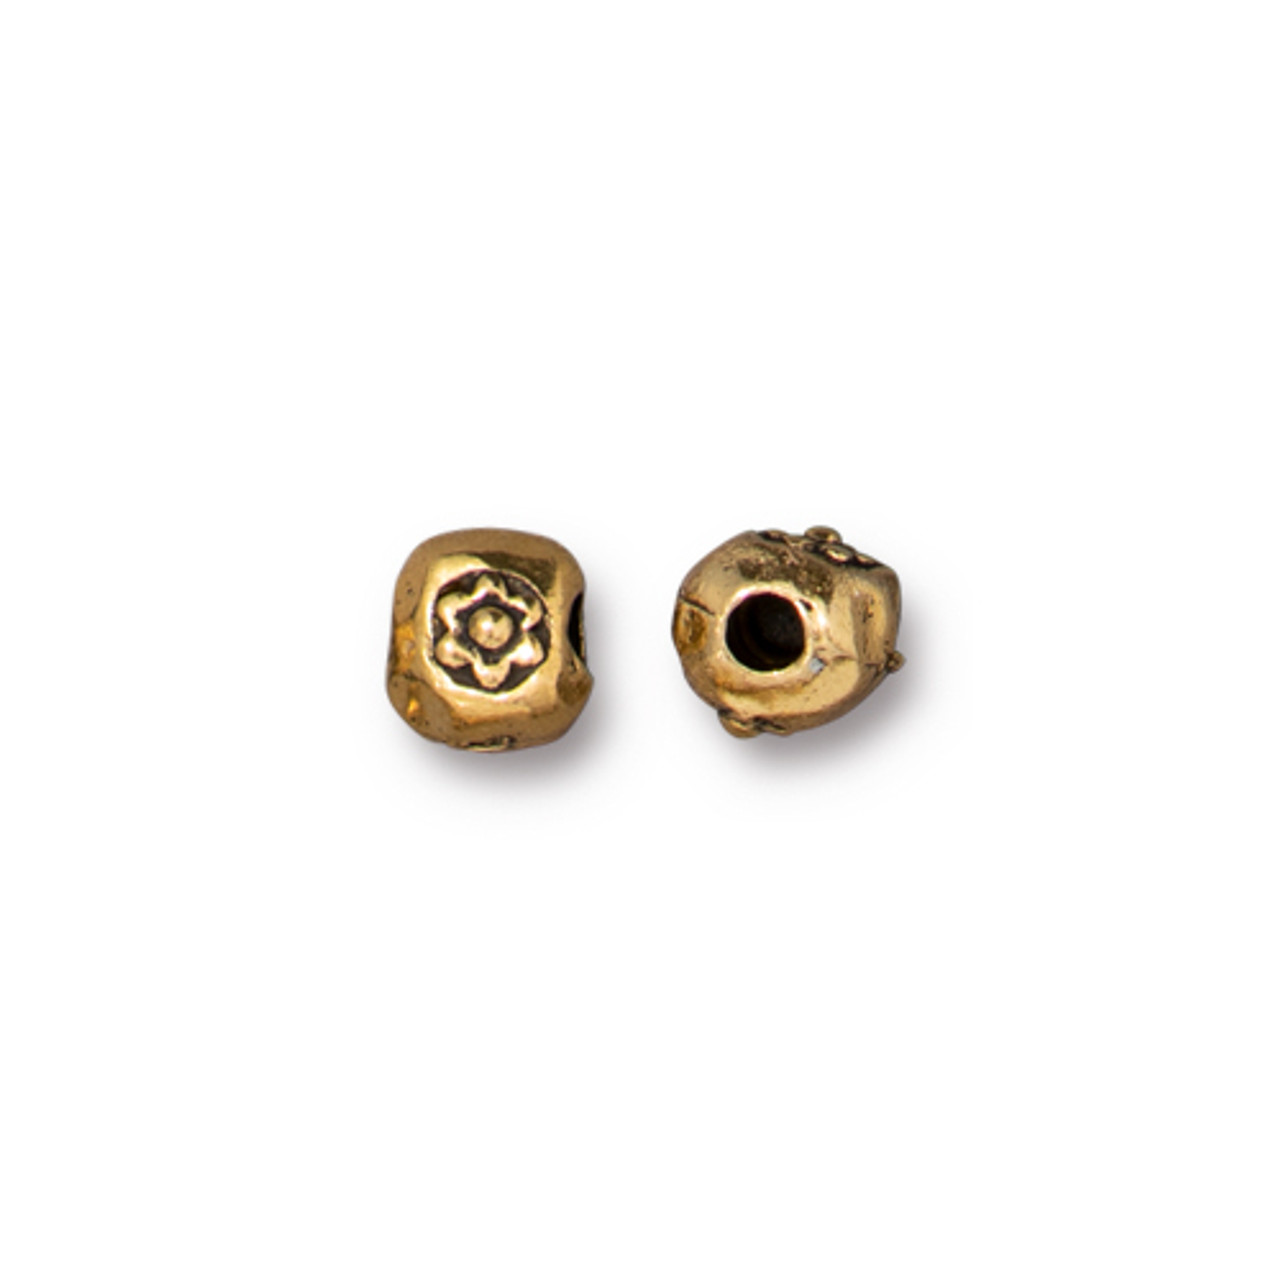 Flower Nugget Large Hole Spacer Bead, Antiqued Gold Plate, 50 per Pack -  TierraCast, Inc.